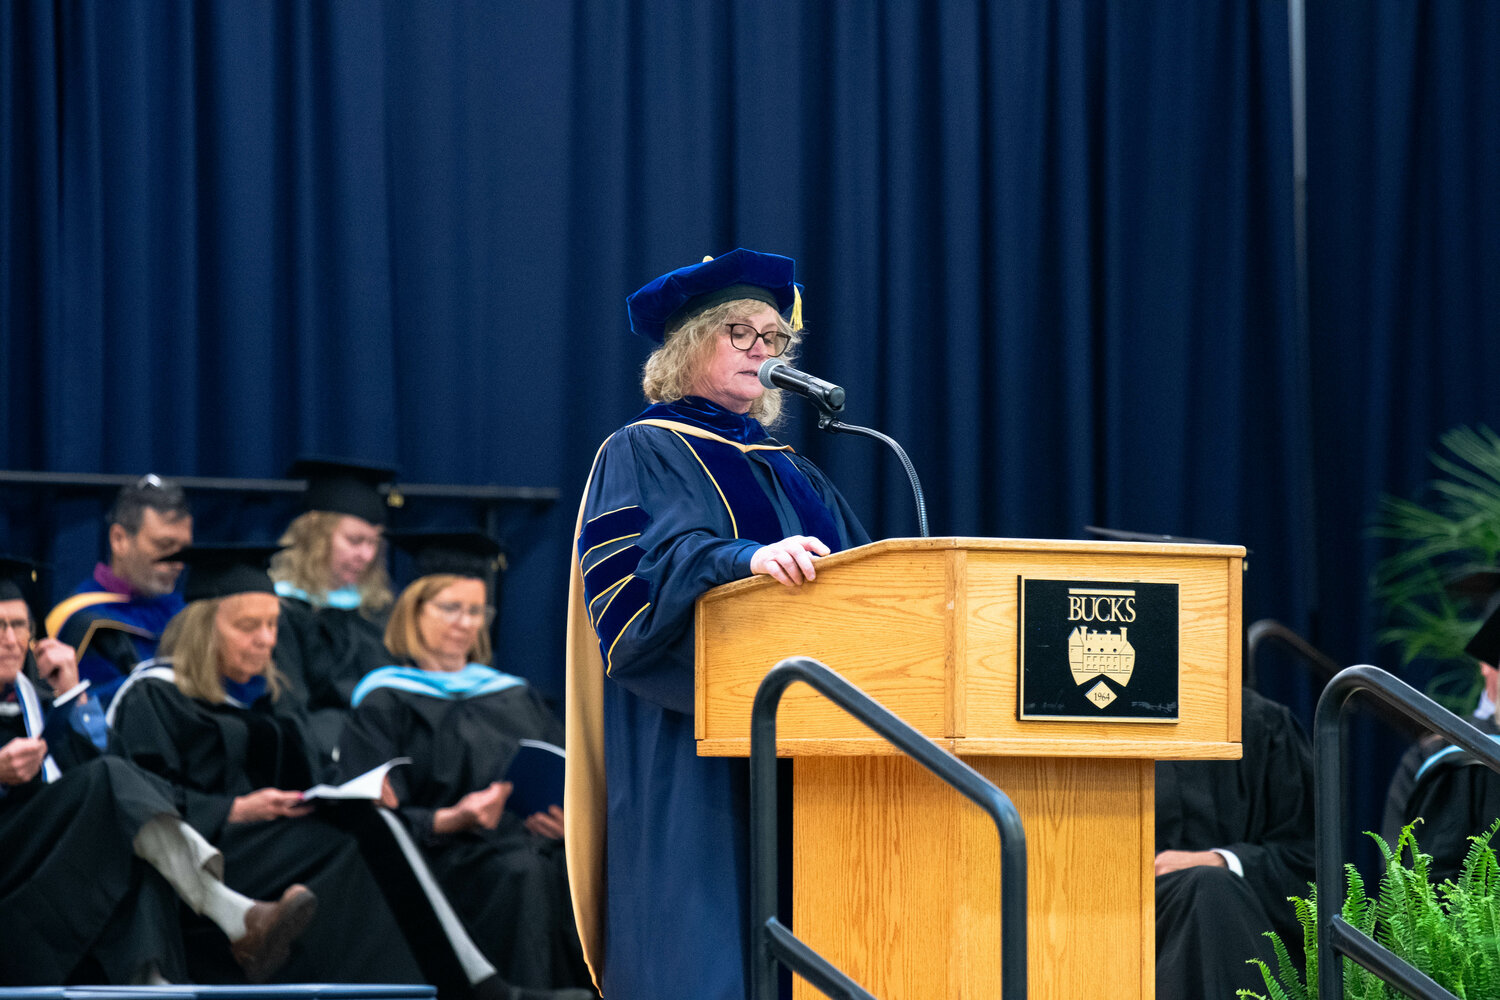 Bucks County Community College Provost Dr. Kelly Kelleway welcomes graduates and their guests to a May 16 commencement ceremony.